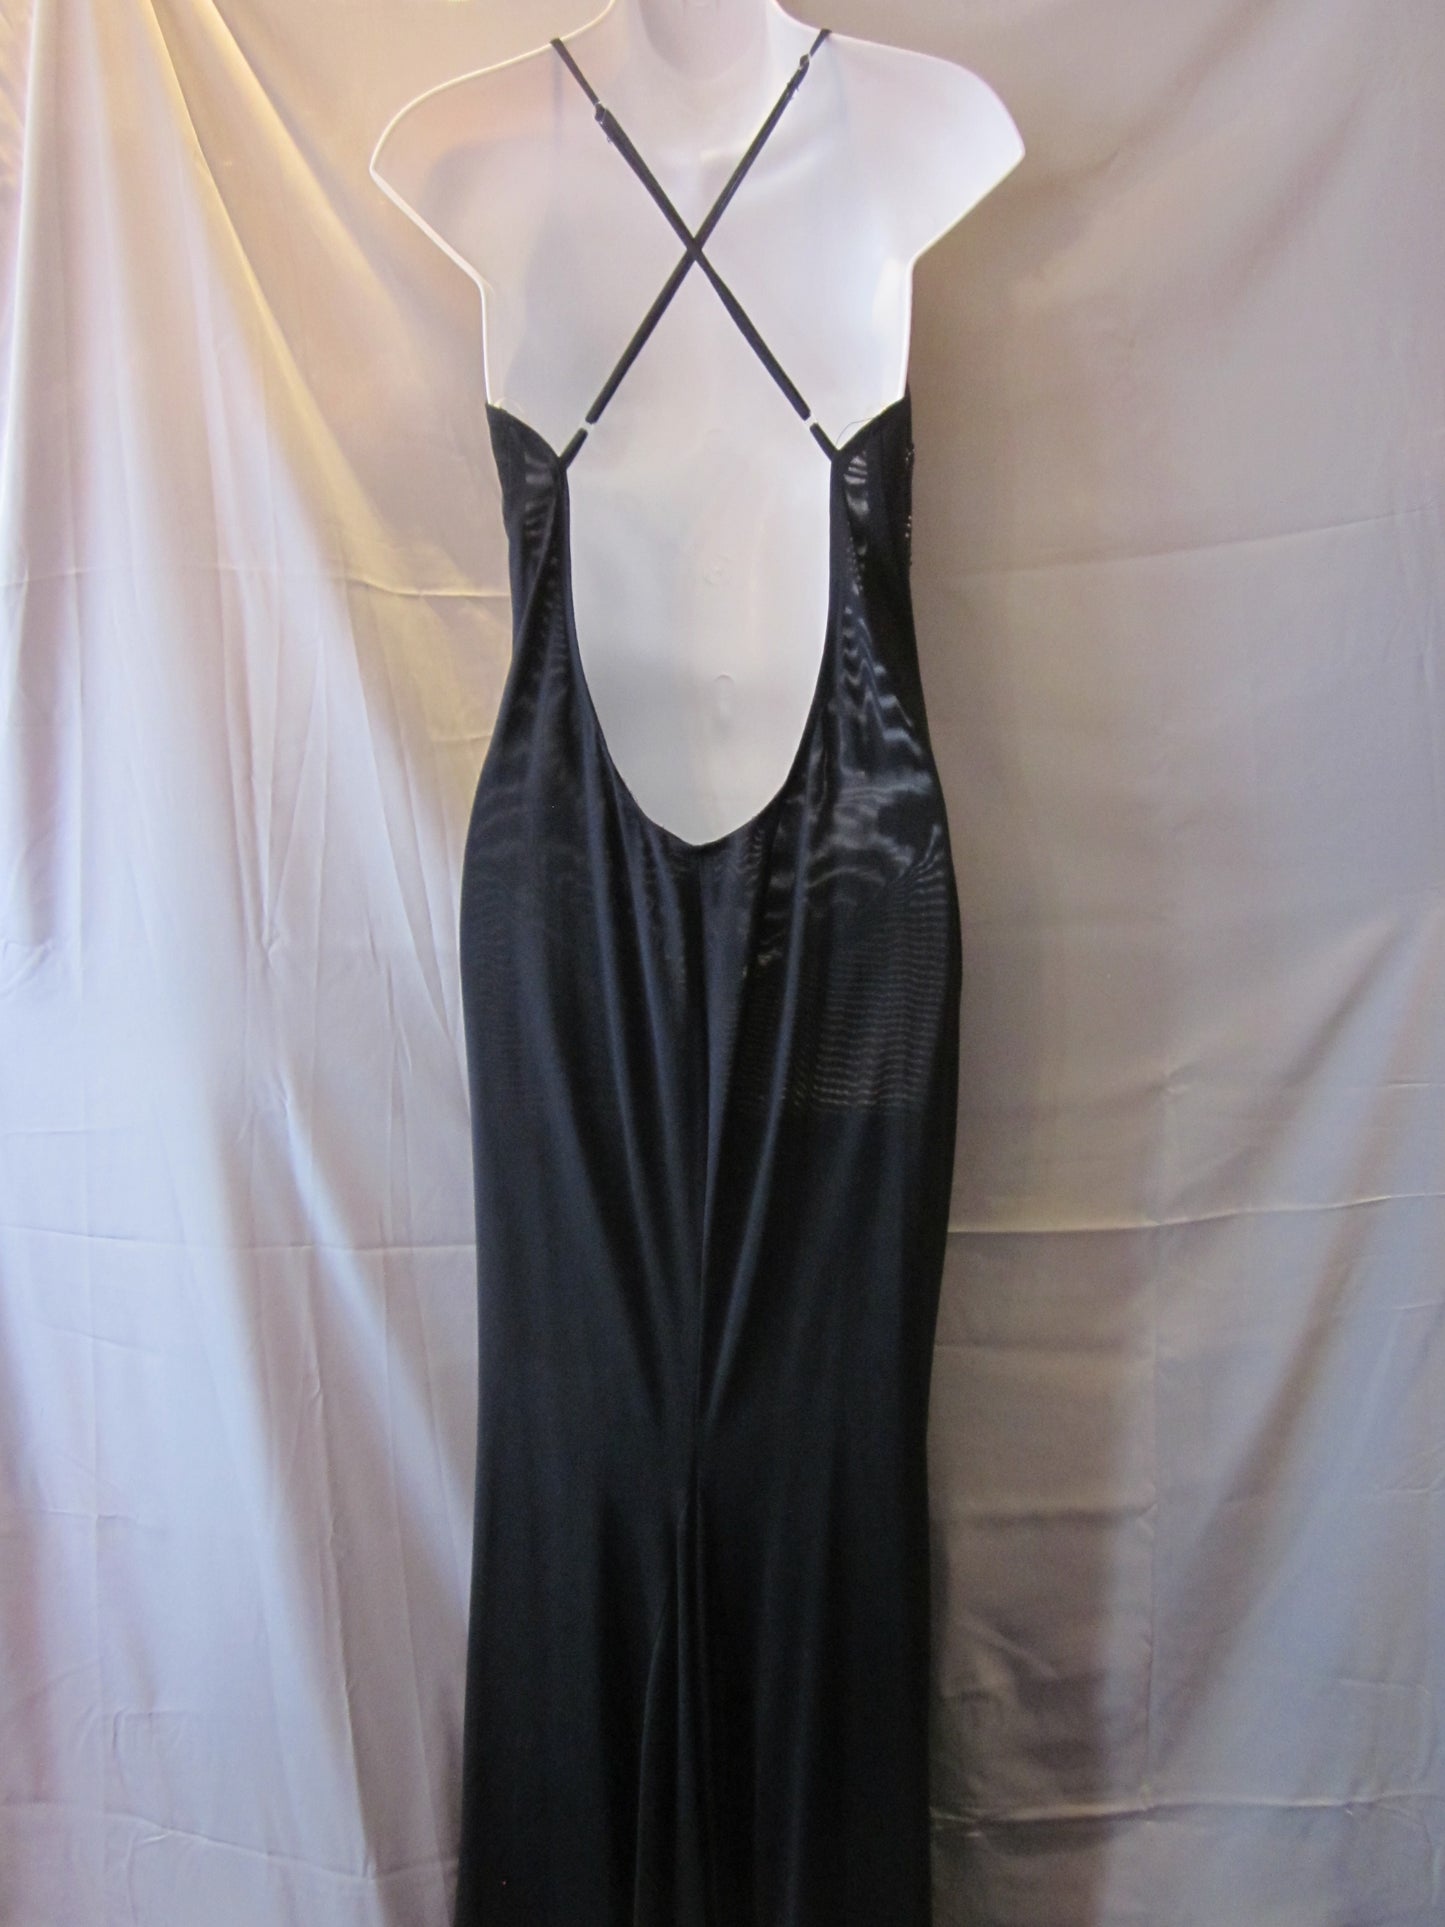 PV Long Dress Size Large Style 506370 - MISS LESTER'S 